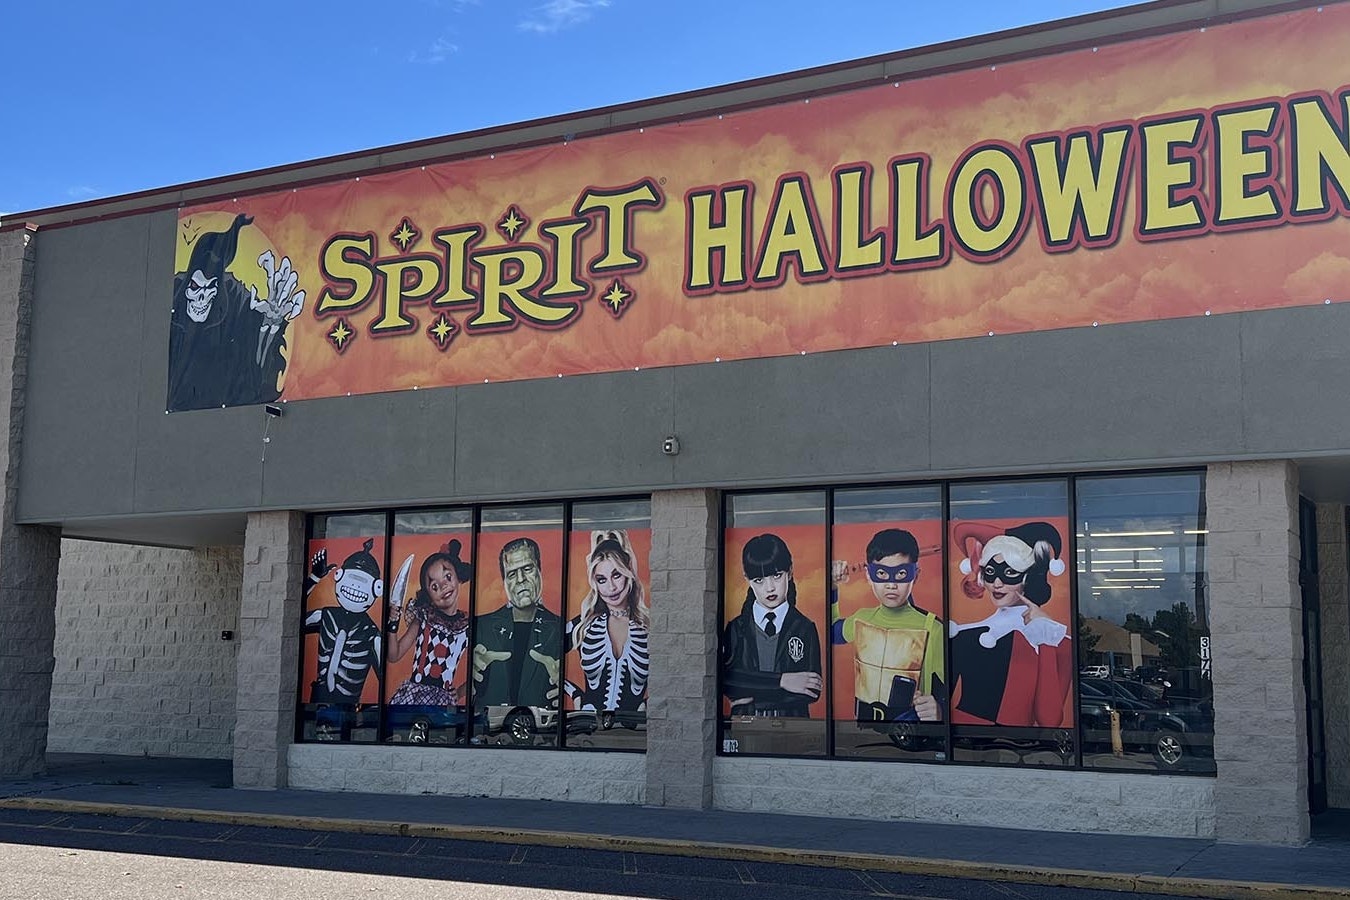 The Spirit Halloween store in Cheyenne opened late Thursday morning, and immediately started early fans of the spooky season.